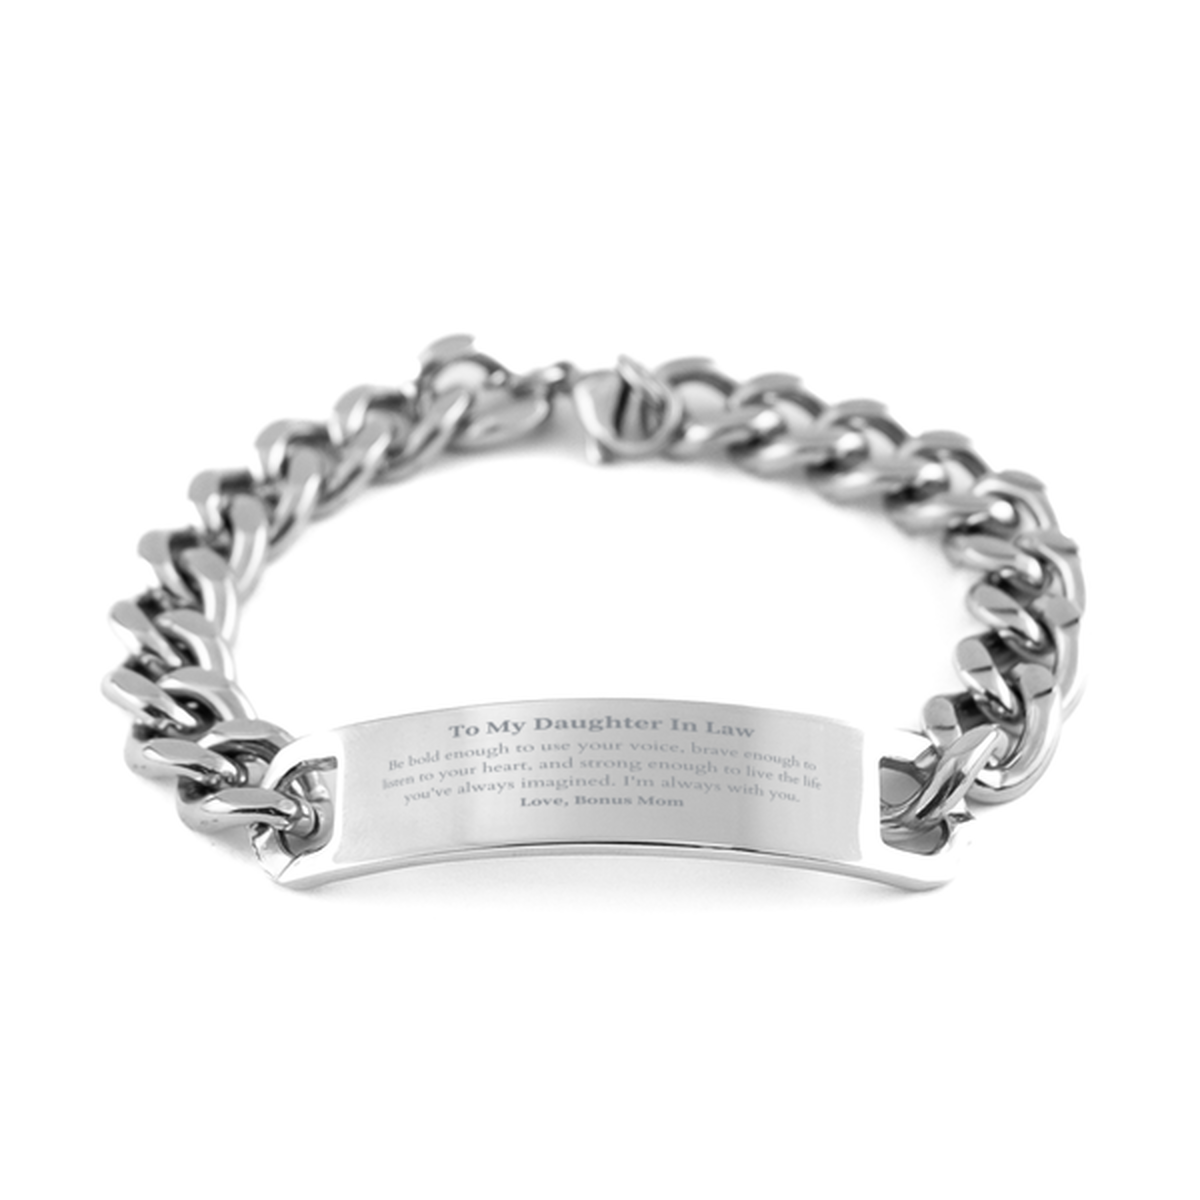 Keepsake Daughter In Law Cuban Chain Stainless Steel Bracelet Gift Idea Graduation Christmas Birthday Daughter In Law from Bonus Mom, Daughter In Law Be bold enough to use your voice, brave enough to listen to your heart. Love, Bonus Mom